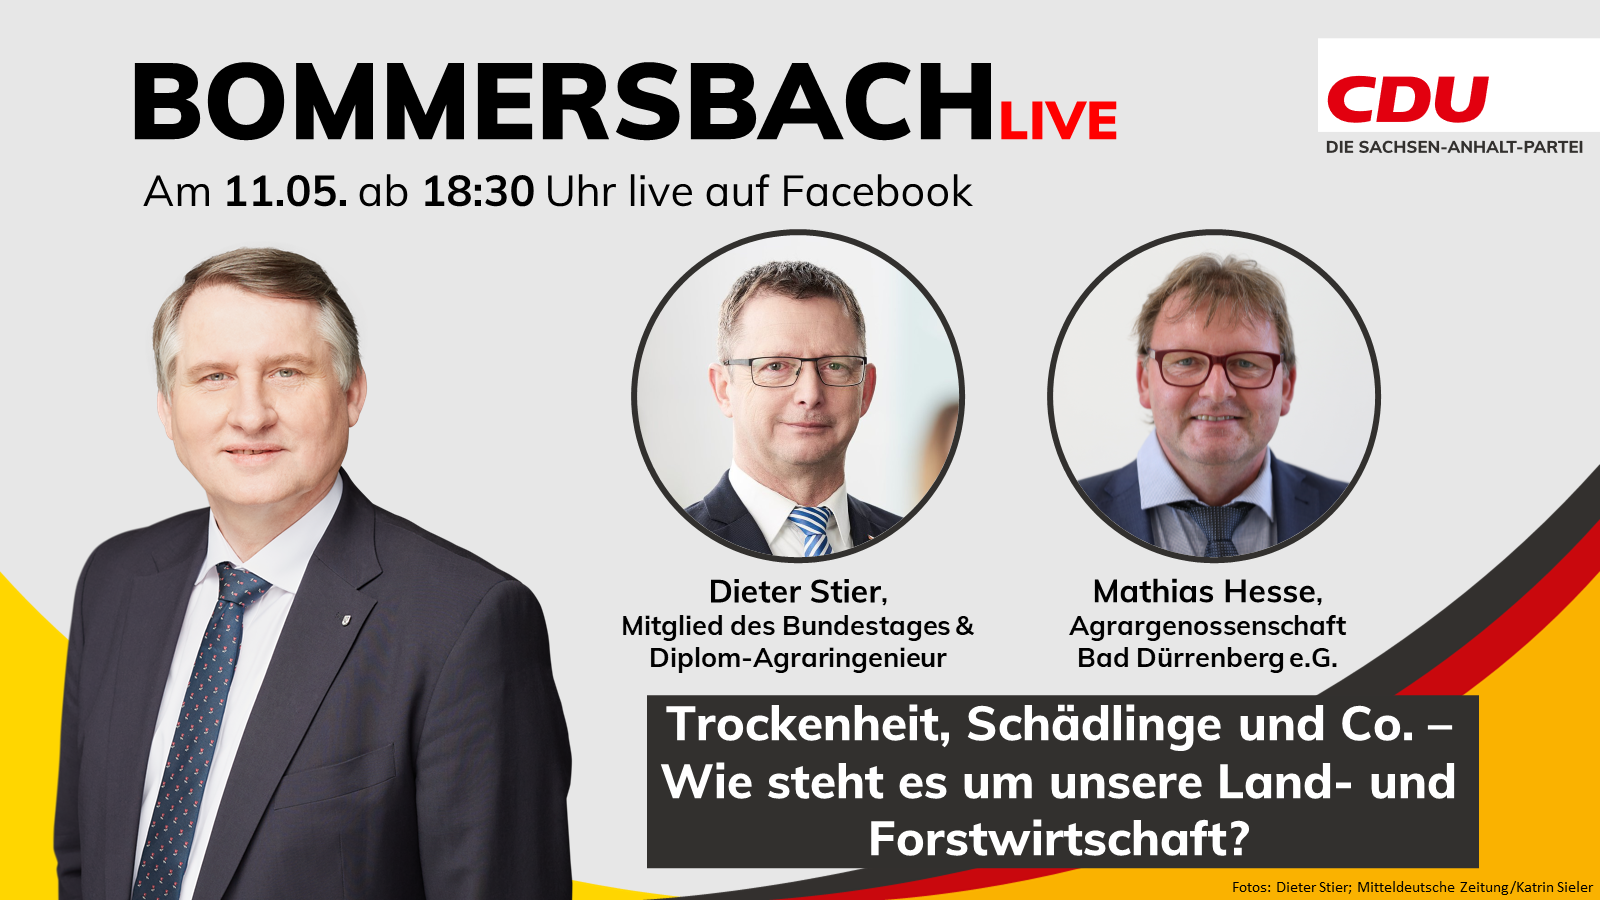 Bommersbach Live